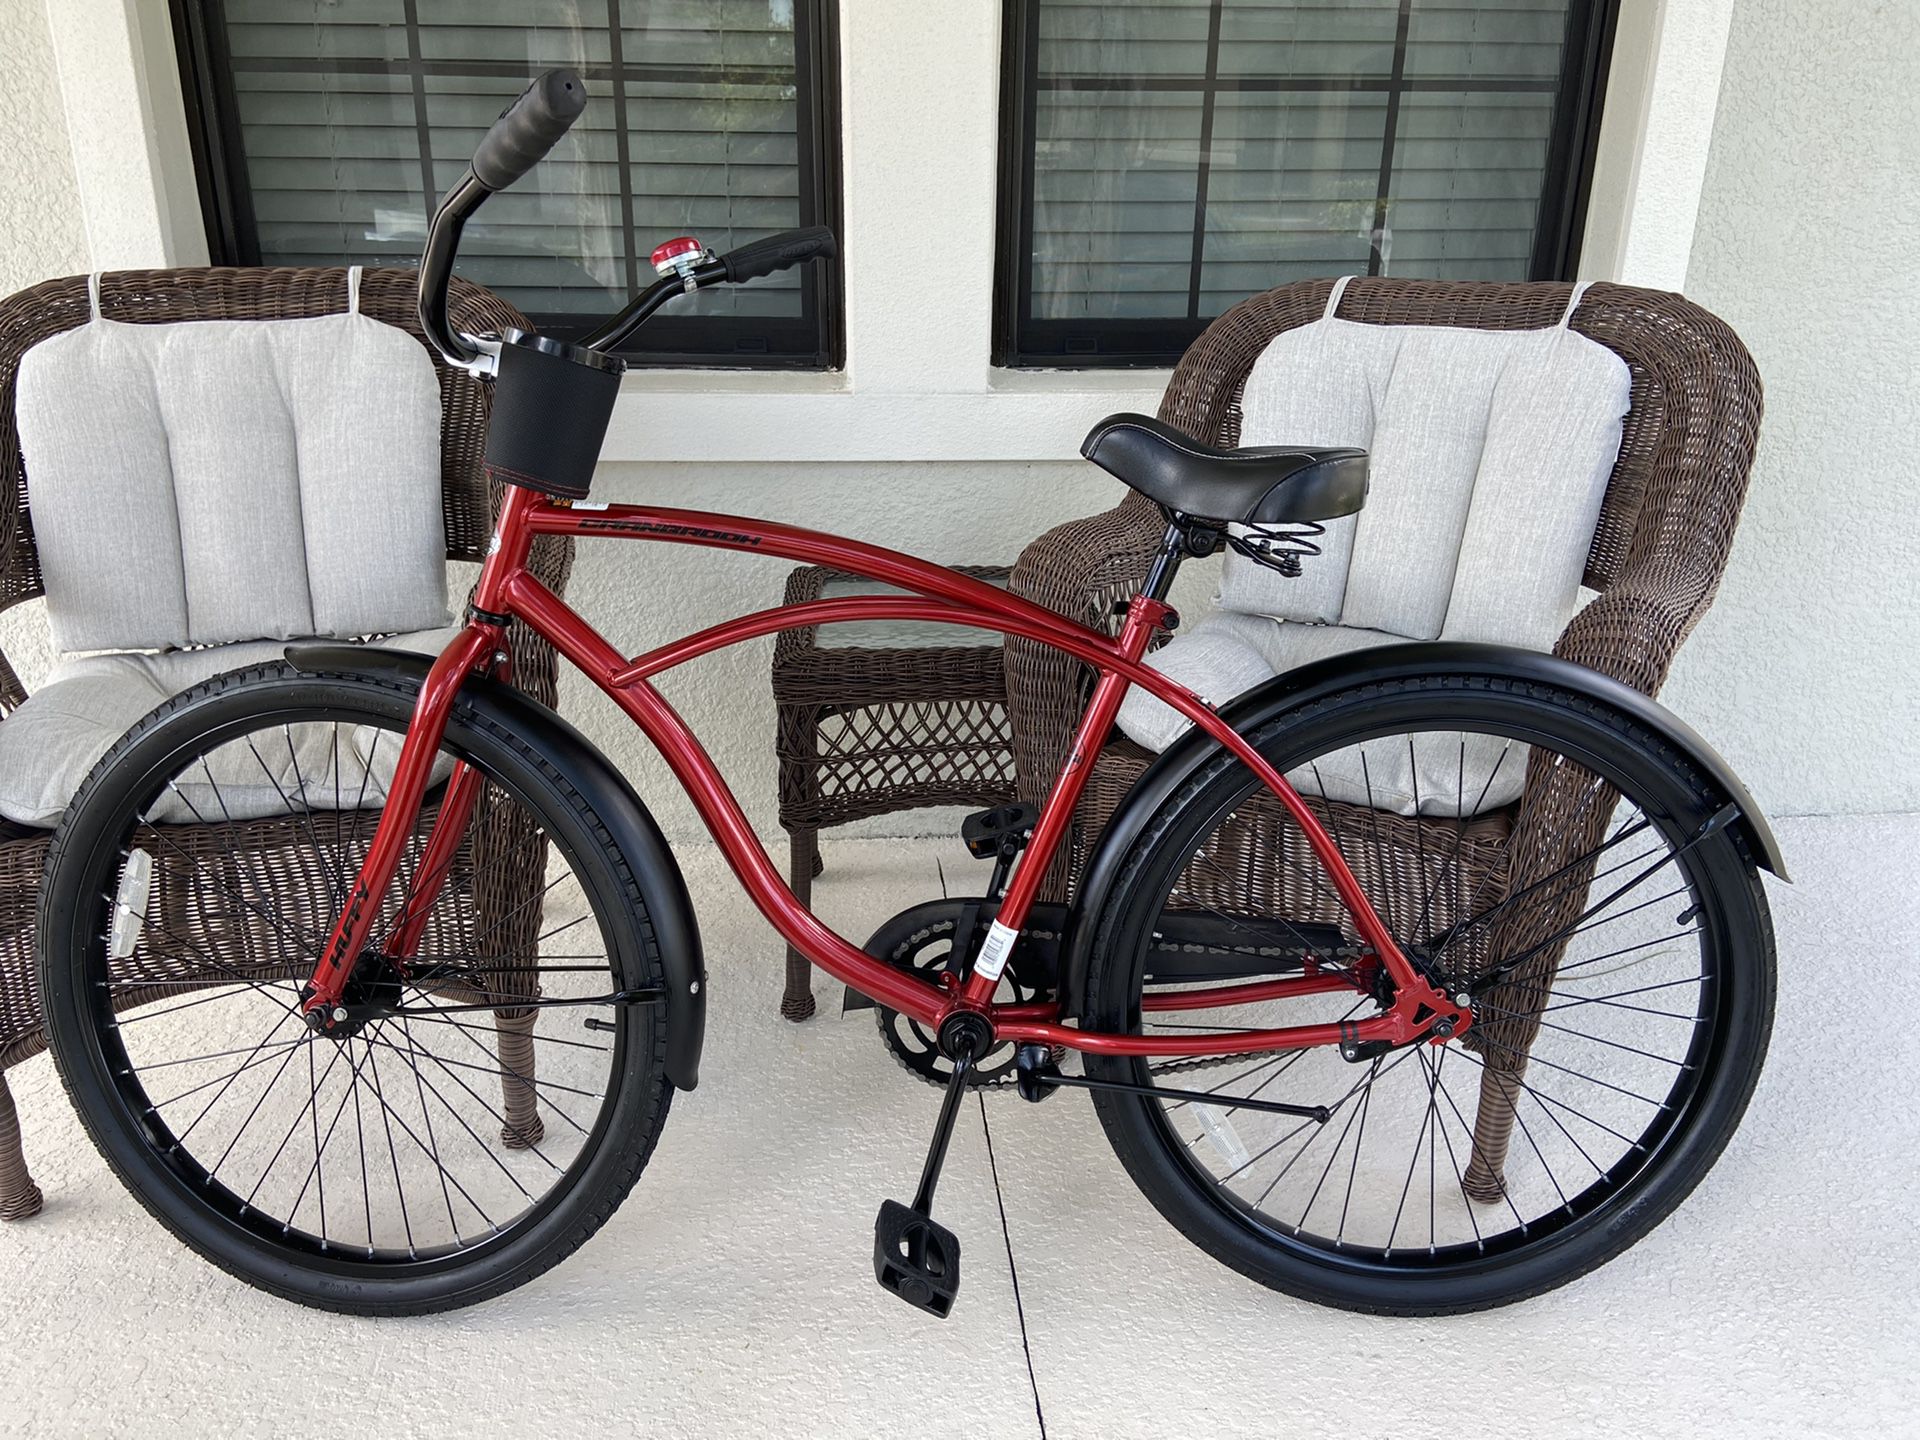 Cruiser bike 26” for riders 5’5” to 5’11” height, great Huffy bike! Cup holder and bell included.